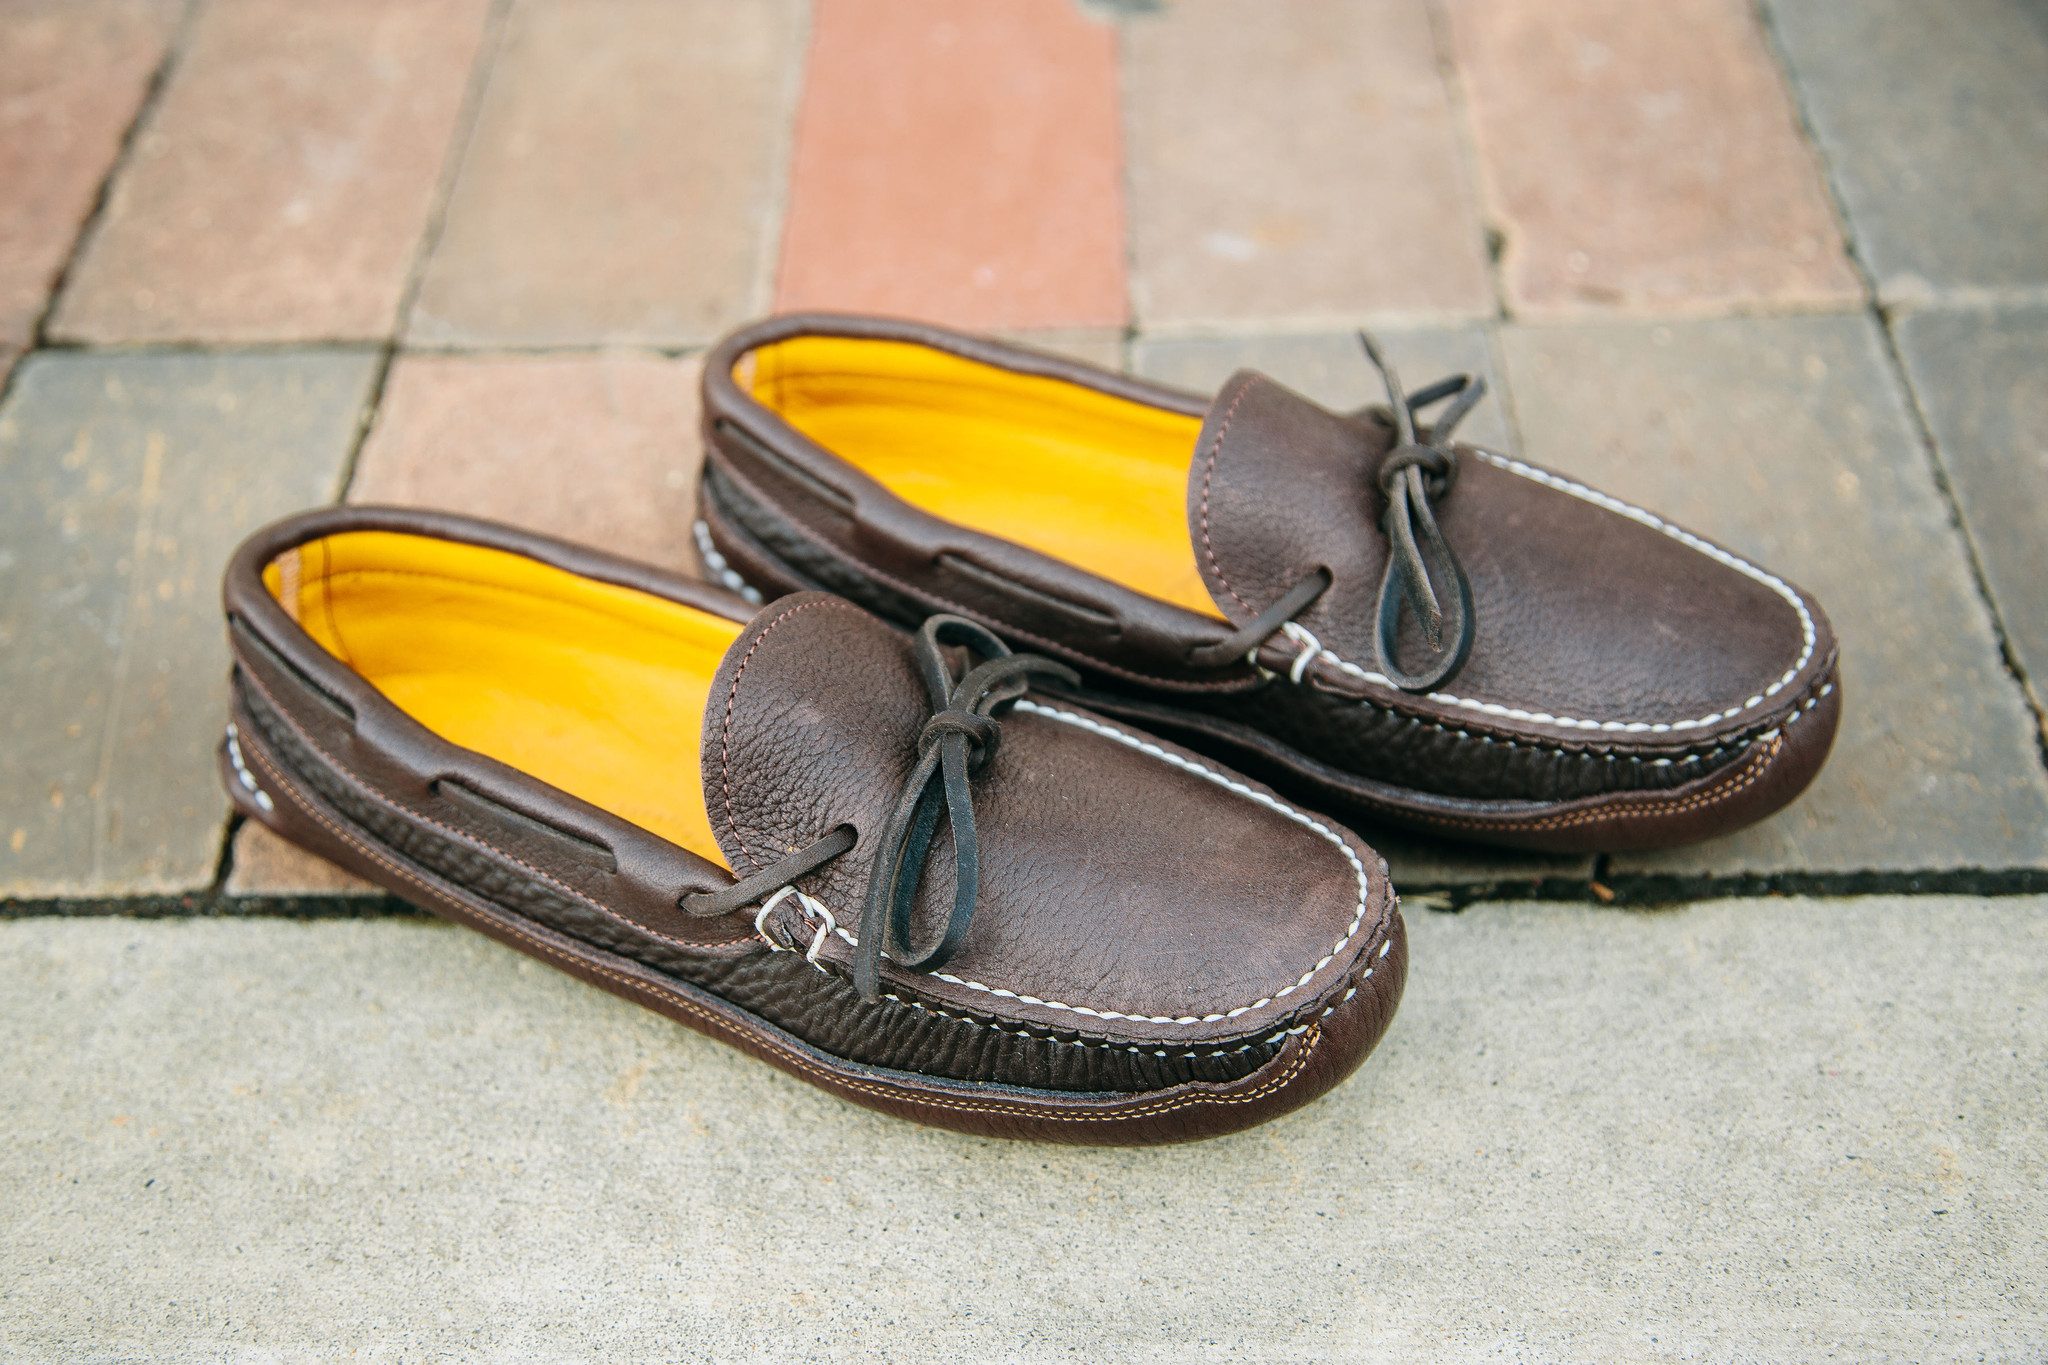 Made in the USA Handcrafted Bull Hide Leather Moccasins for Men